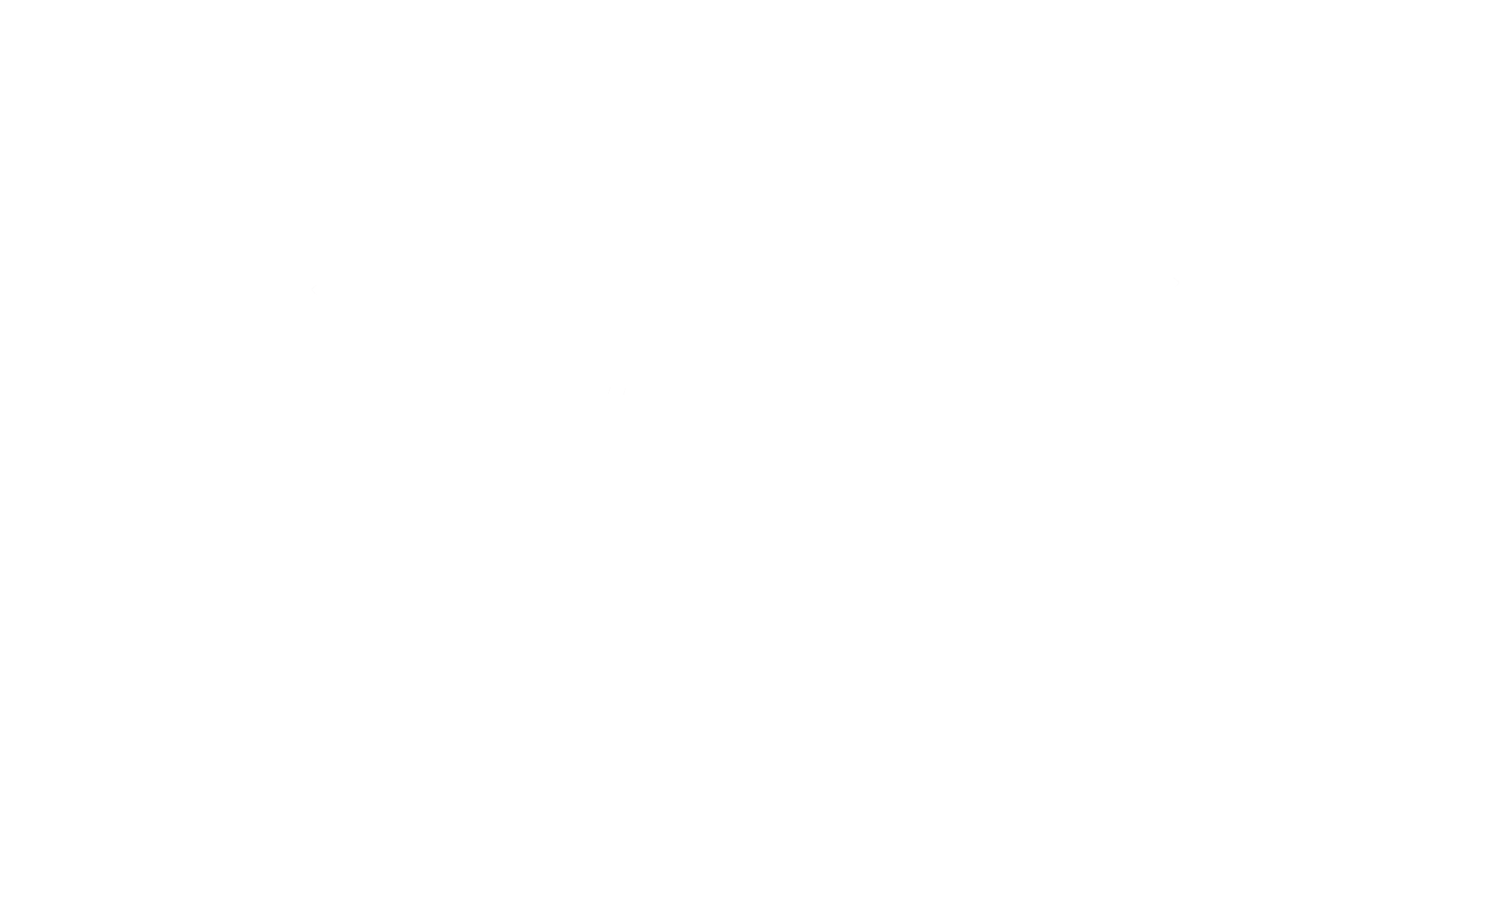 The West Side Sports Bar & Grill